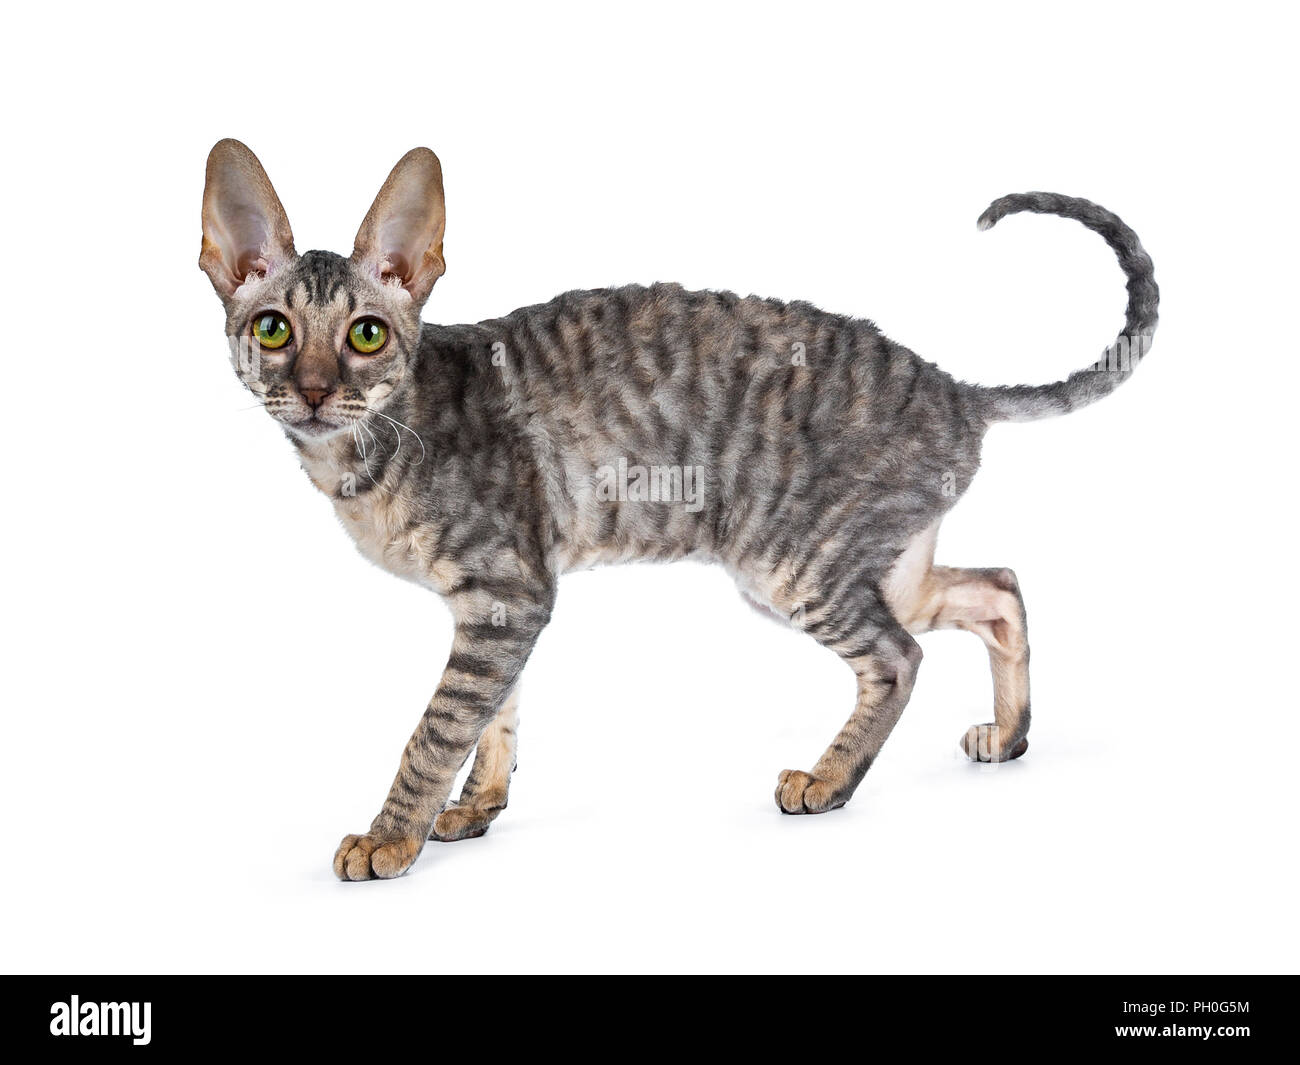 Blue tortie tabby Cornish Rex kitten walking / standing side ways, looking at camera isolated on white background Stock Photo